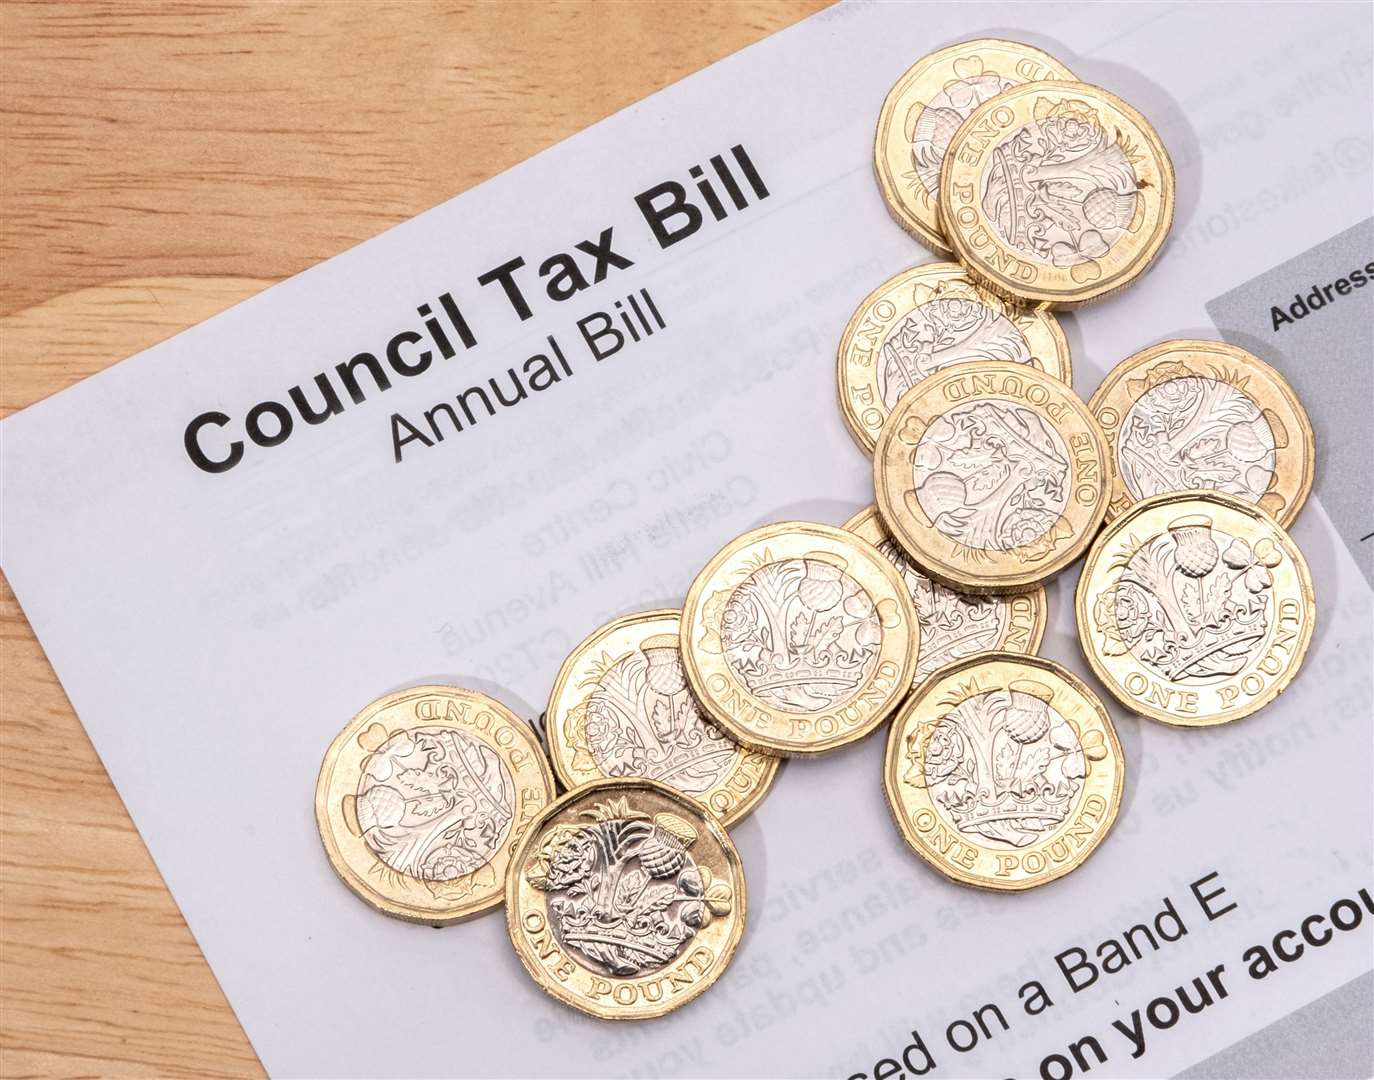 Council tax will go up by the maximum amount in Maidstone